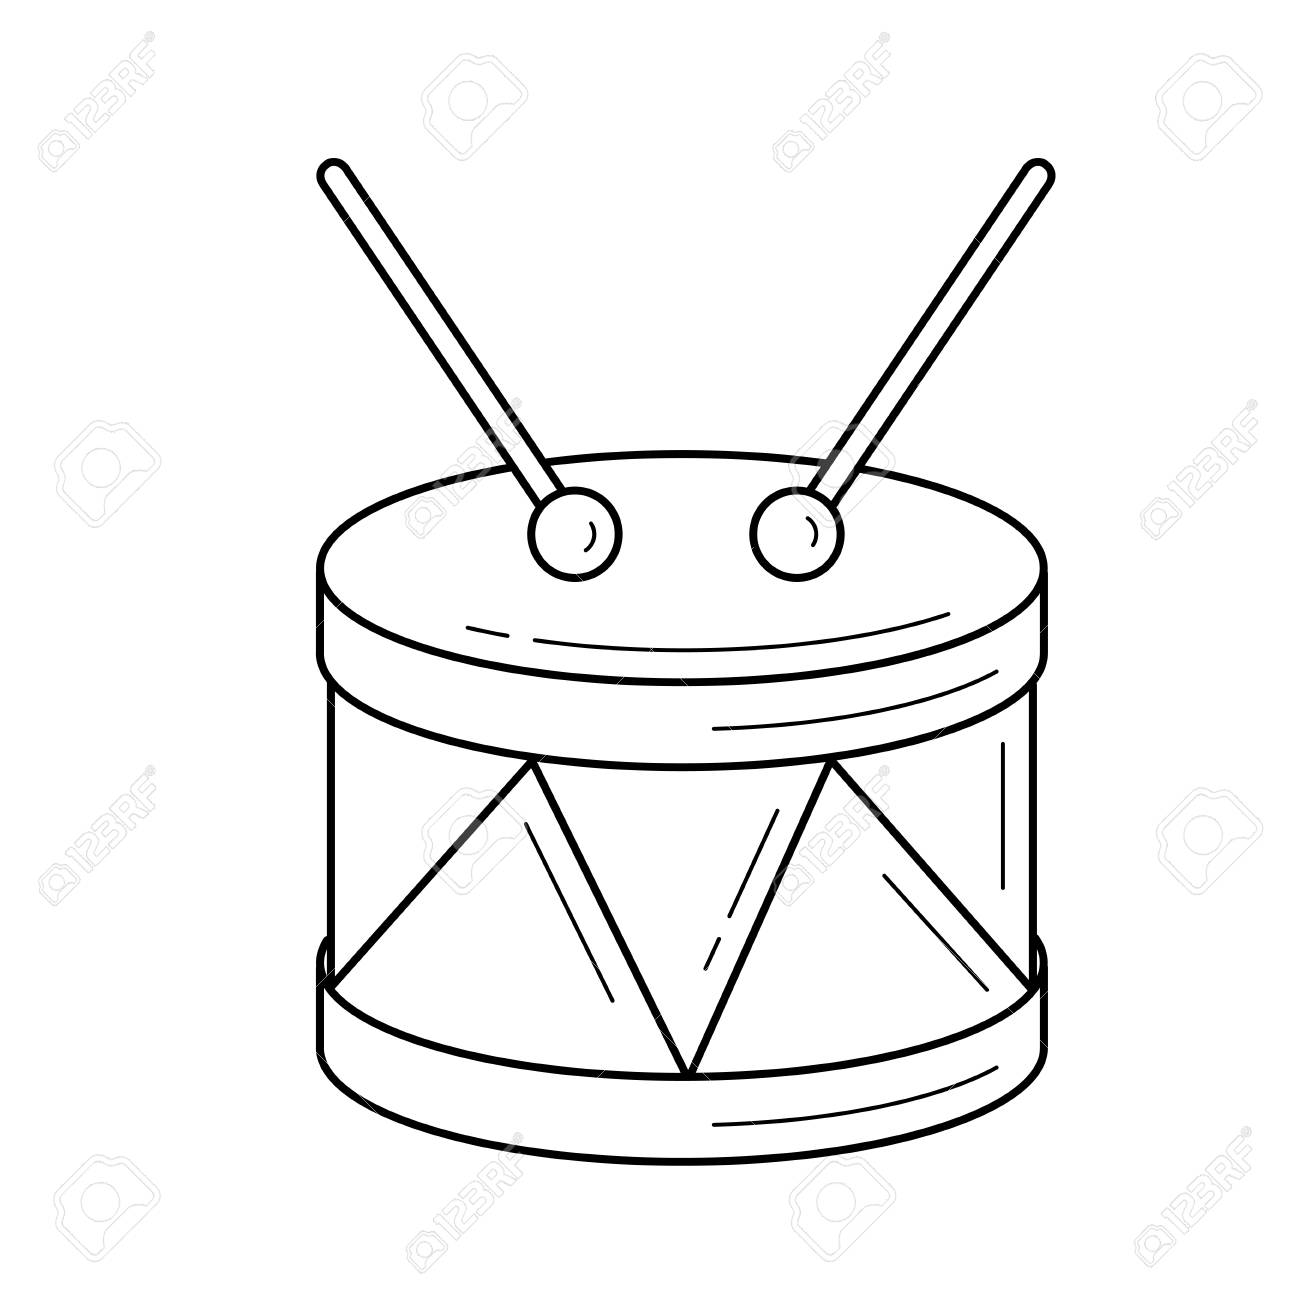 Snare Drum Vector Line Icon Isolated On White Background